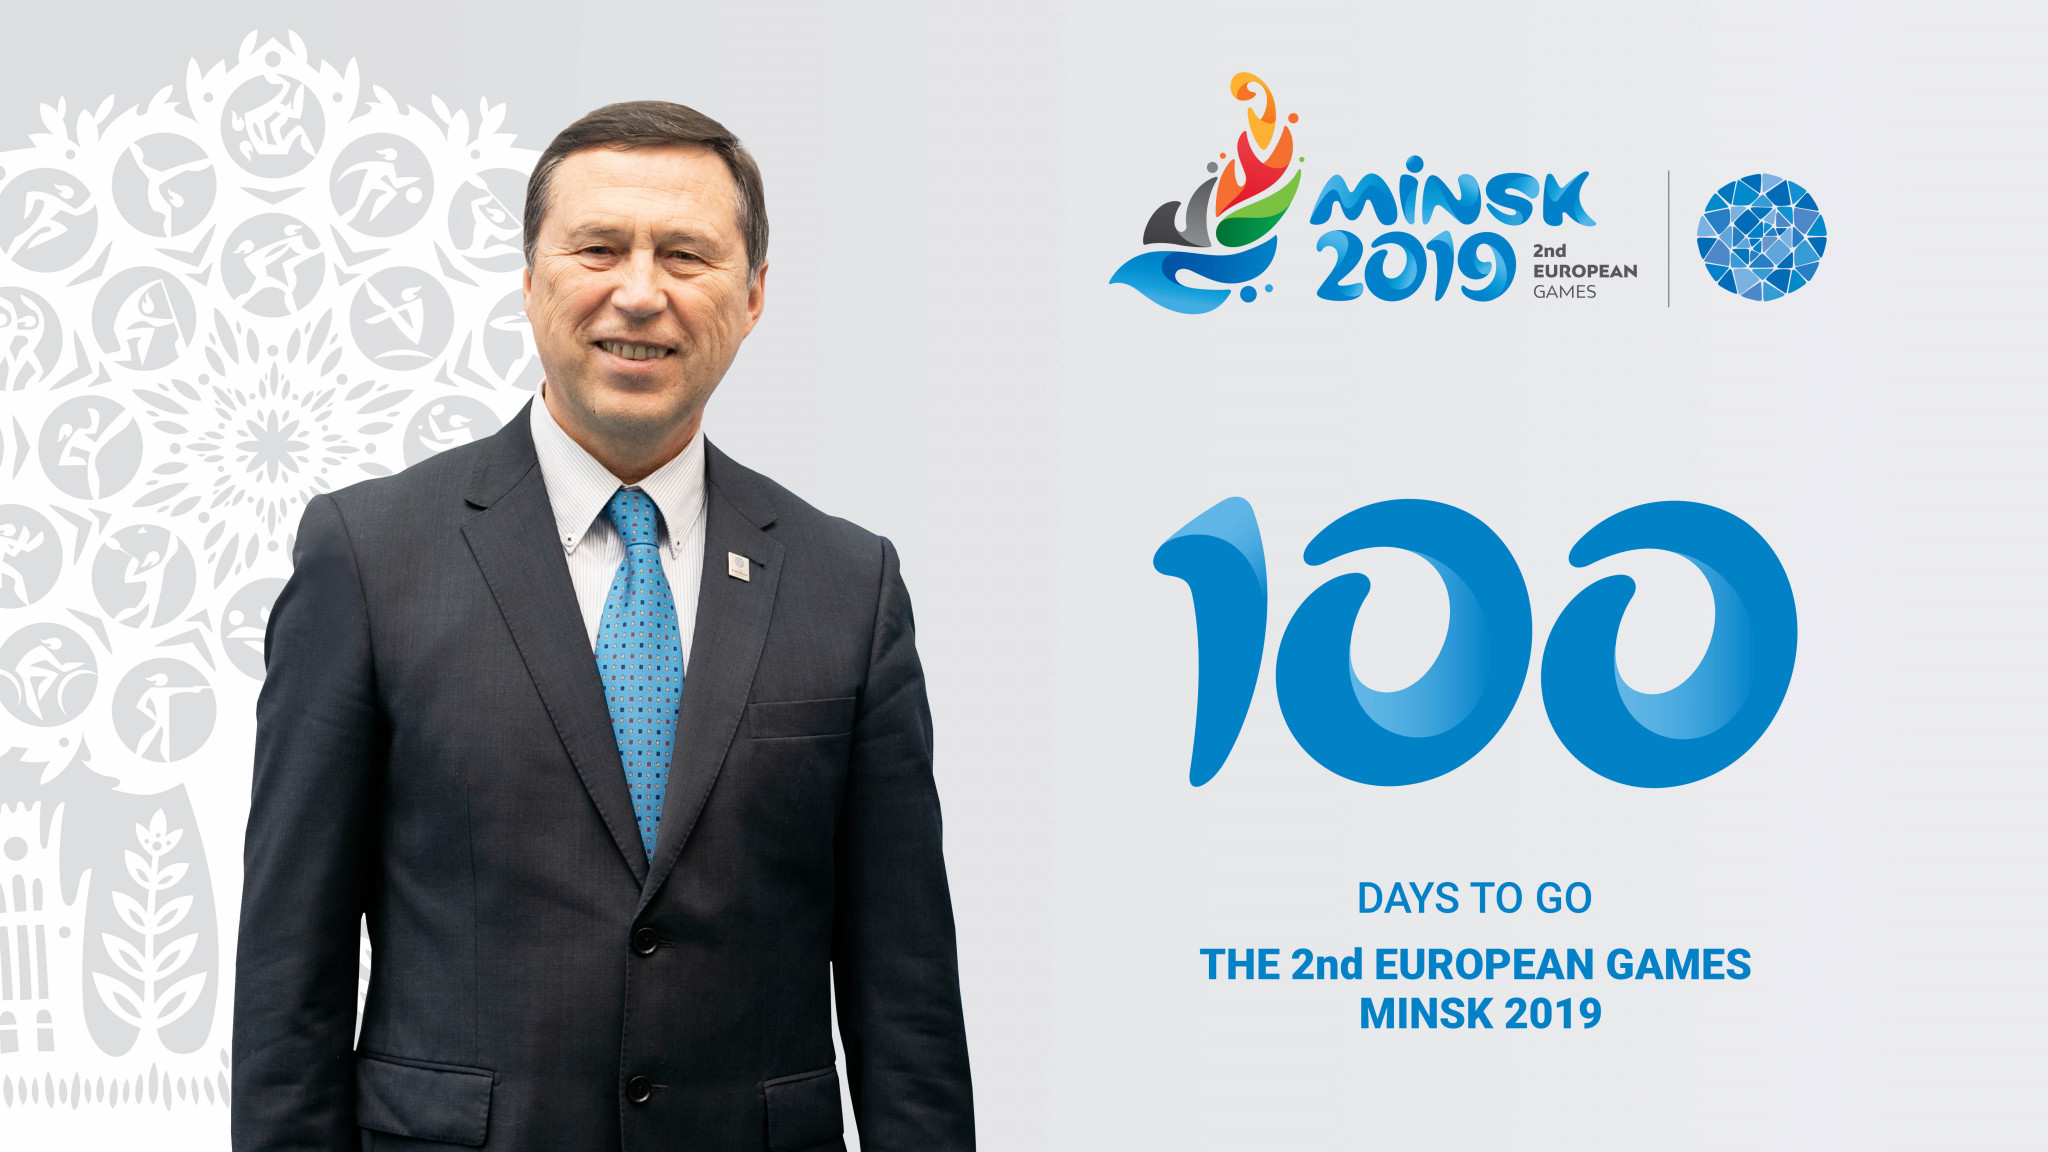 George Katulin and Minsk 2019 have marked 100 days to go ©Minsk 2019